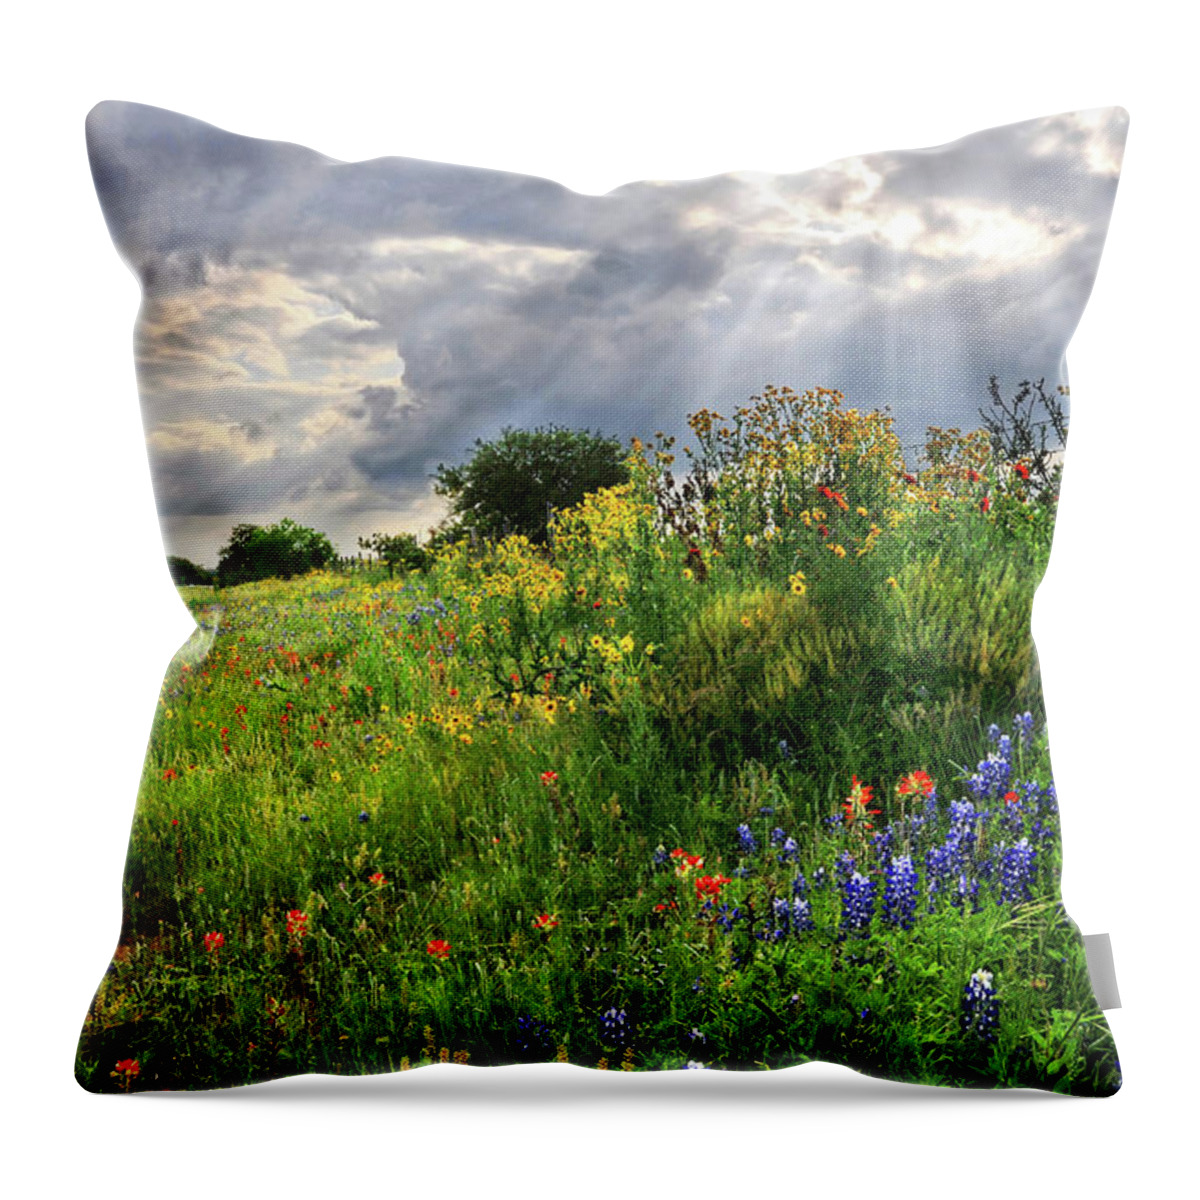 Wildflowers Throw Pillow featuring the photograph Heaven's Light by Lynn Bauer